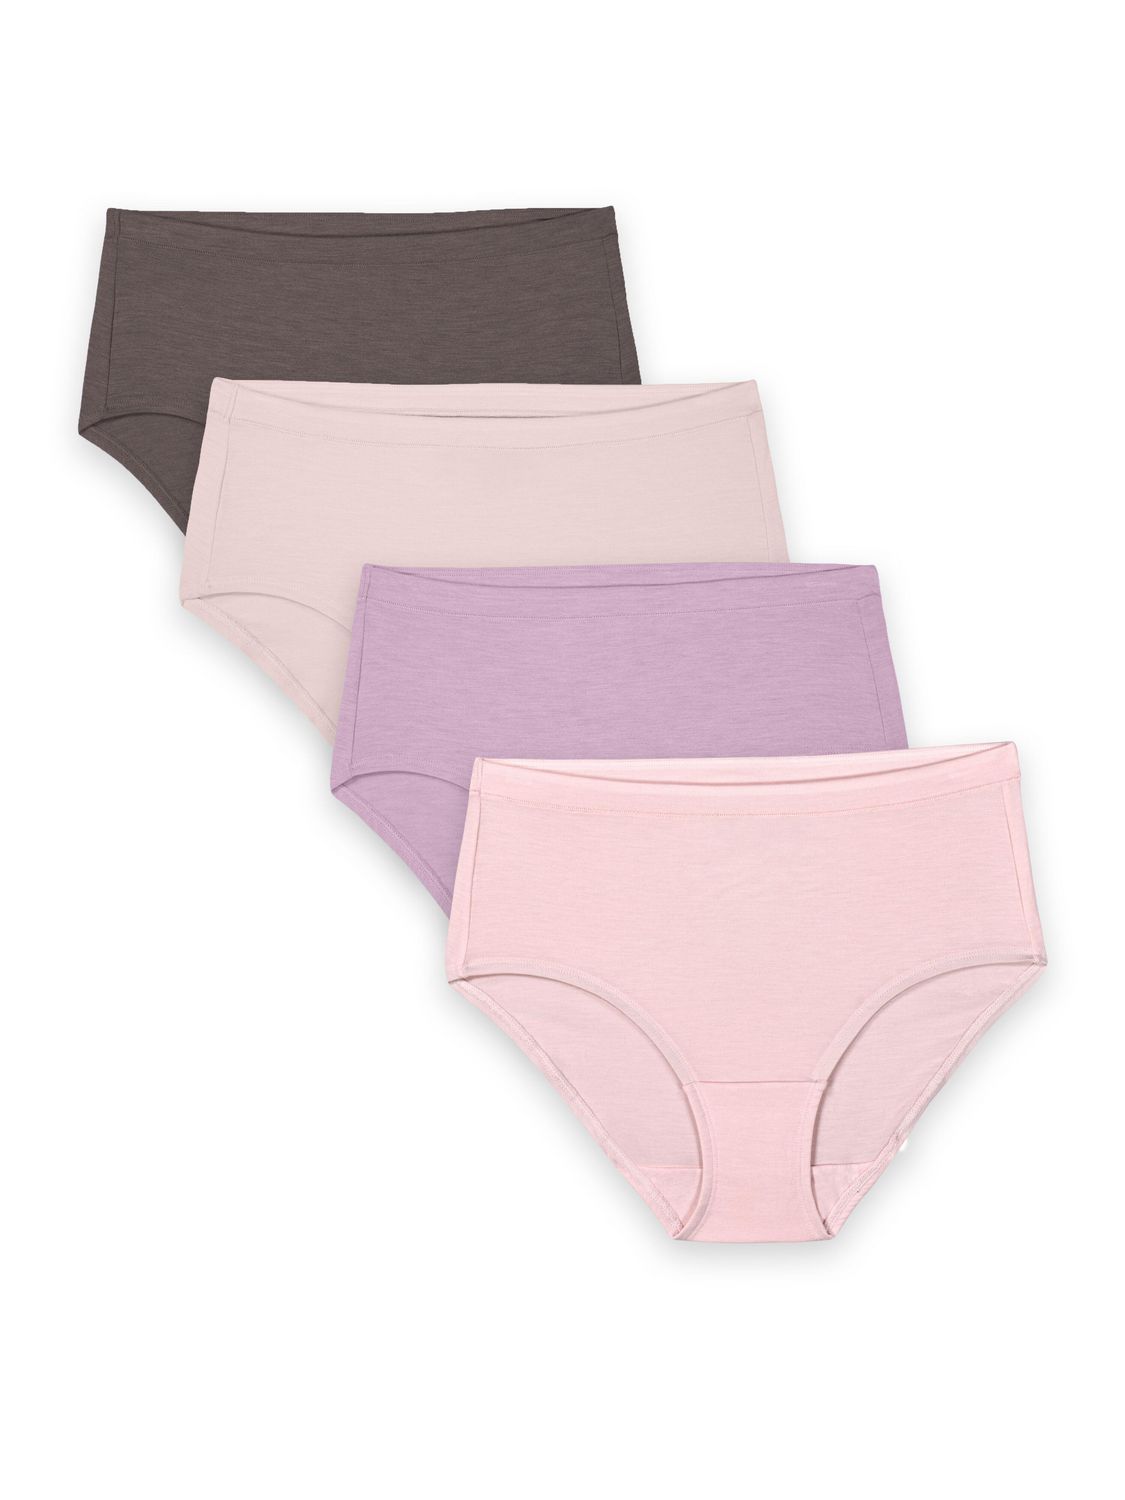 Fruit of the Loom Women's Ultra Soft Modal Low-rise Brief, 4-Pack